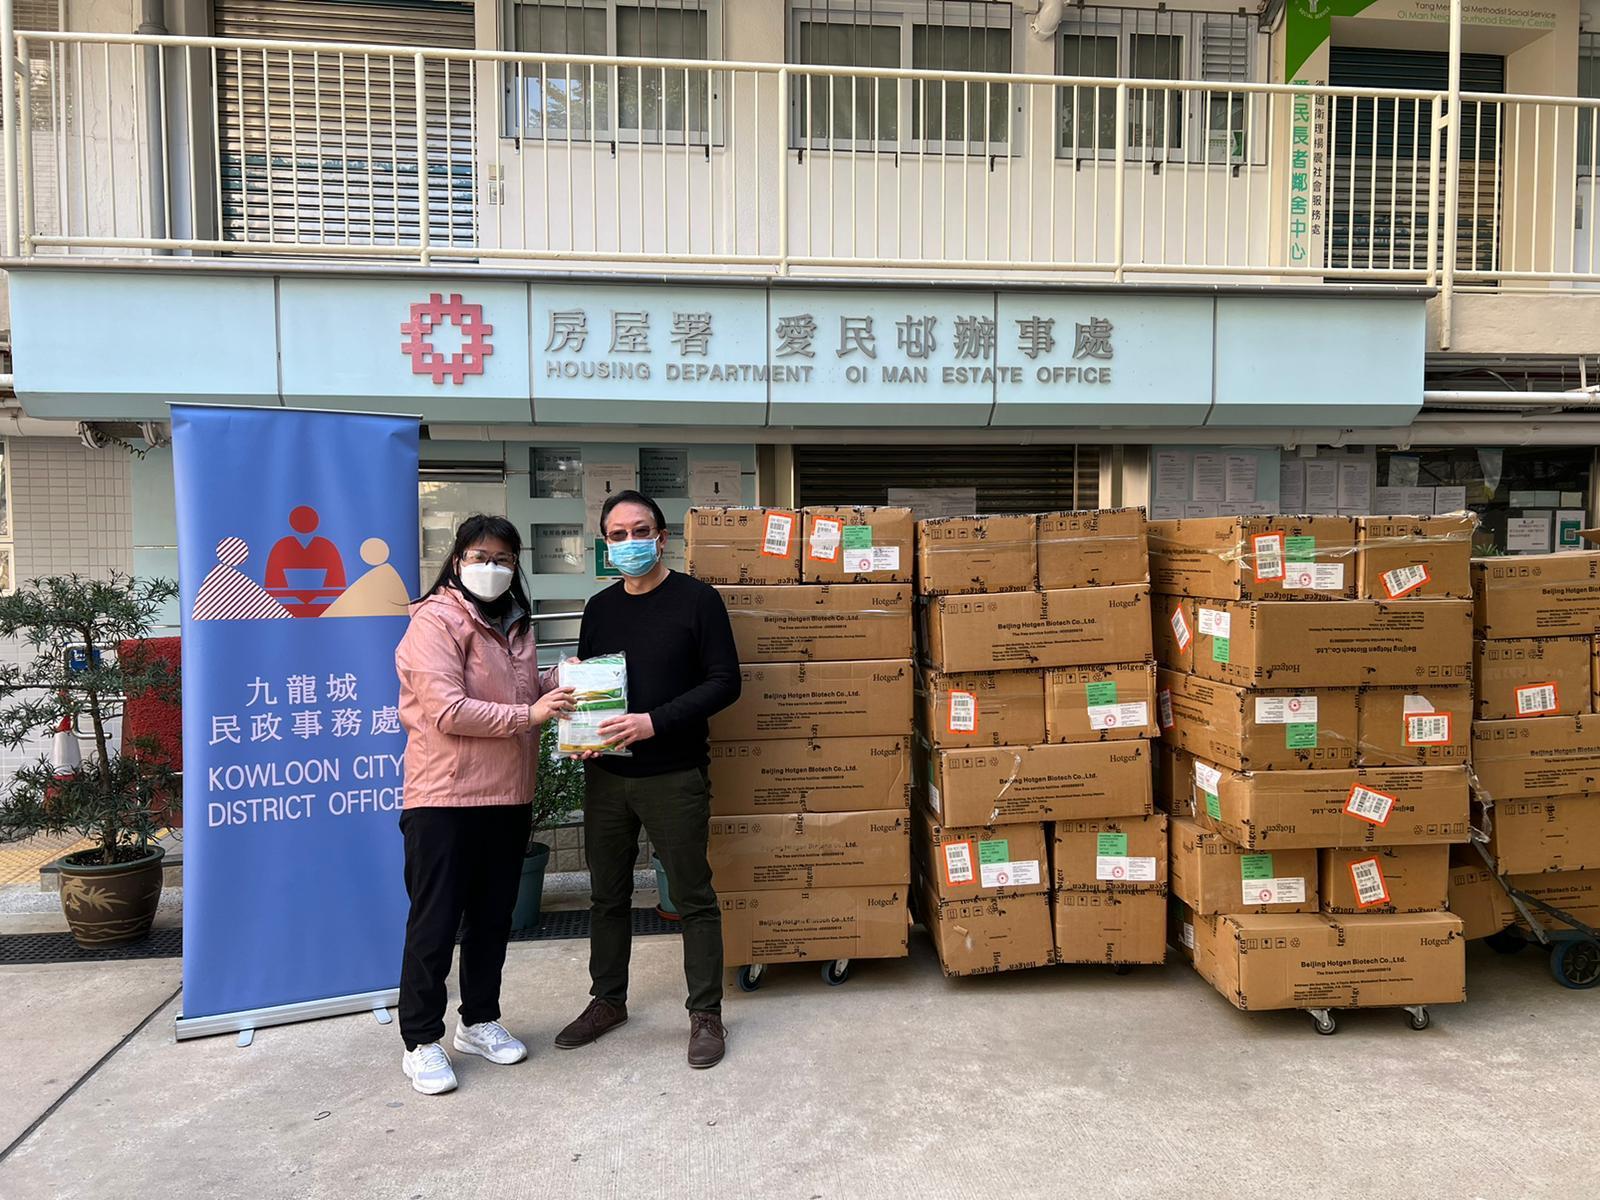 The Kowloon City District Office today (February 27) distributed COVID-19 rapid test kits to households, cleansing workers and property management staff living and working in Oi Man Estate, Ho Man Tin for voluntary testing through the Housing Department and the property management company.